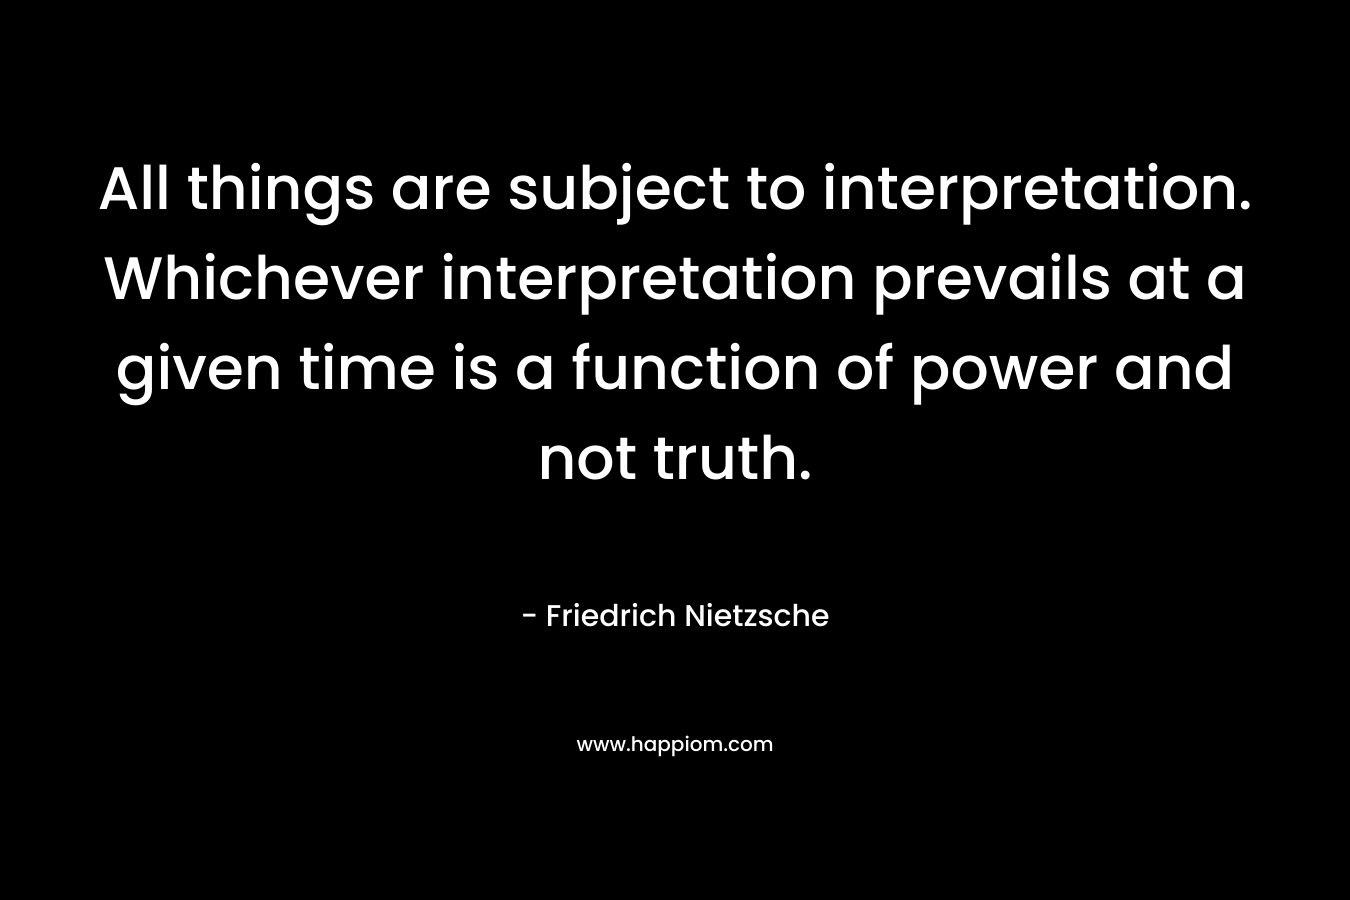 All things are subject to interpretation. Whichever interpretation prevails at a given time is a function of power and not truth.